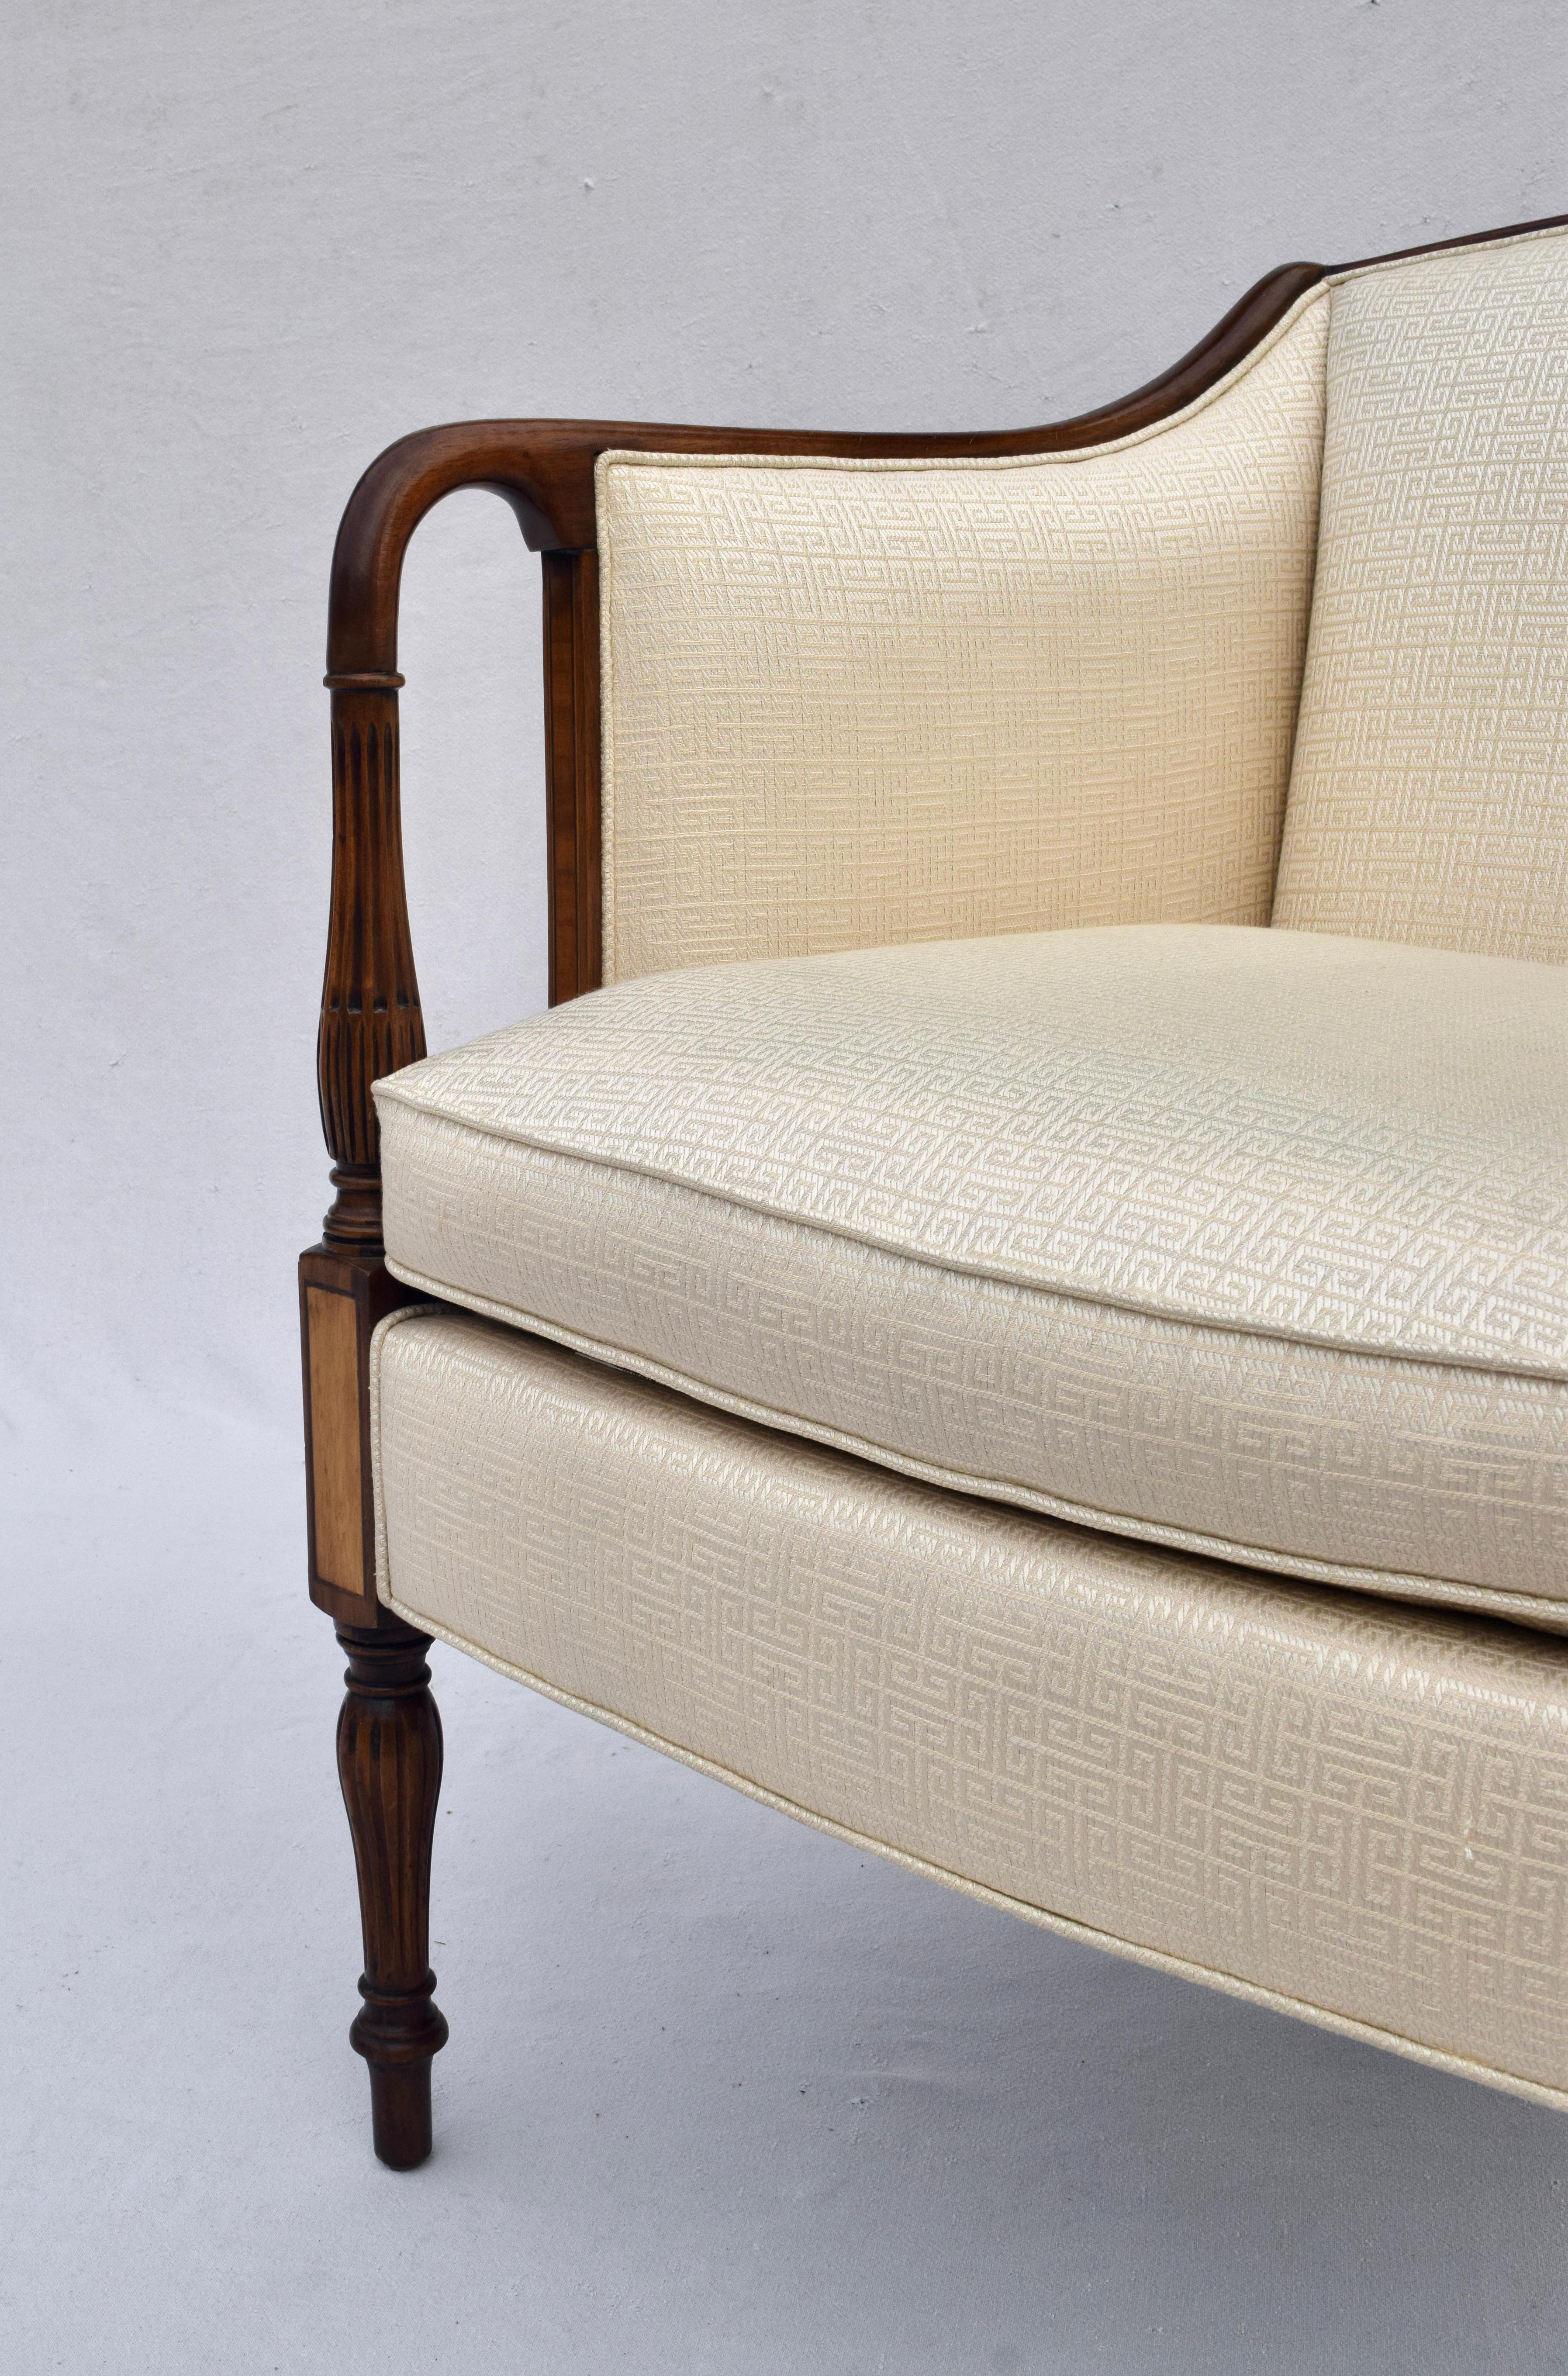 Sheraton Federal Style Upholstered Inlaid Club Chairs by Southwood Hickory, NC 3